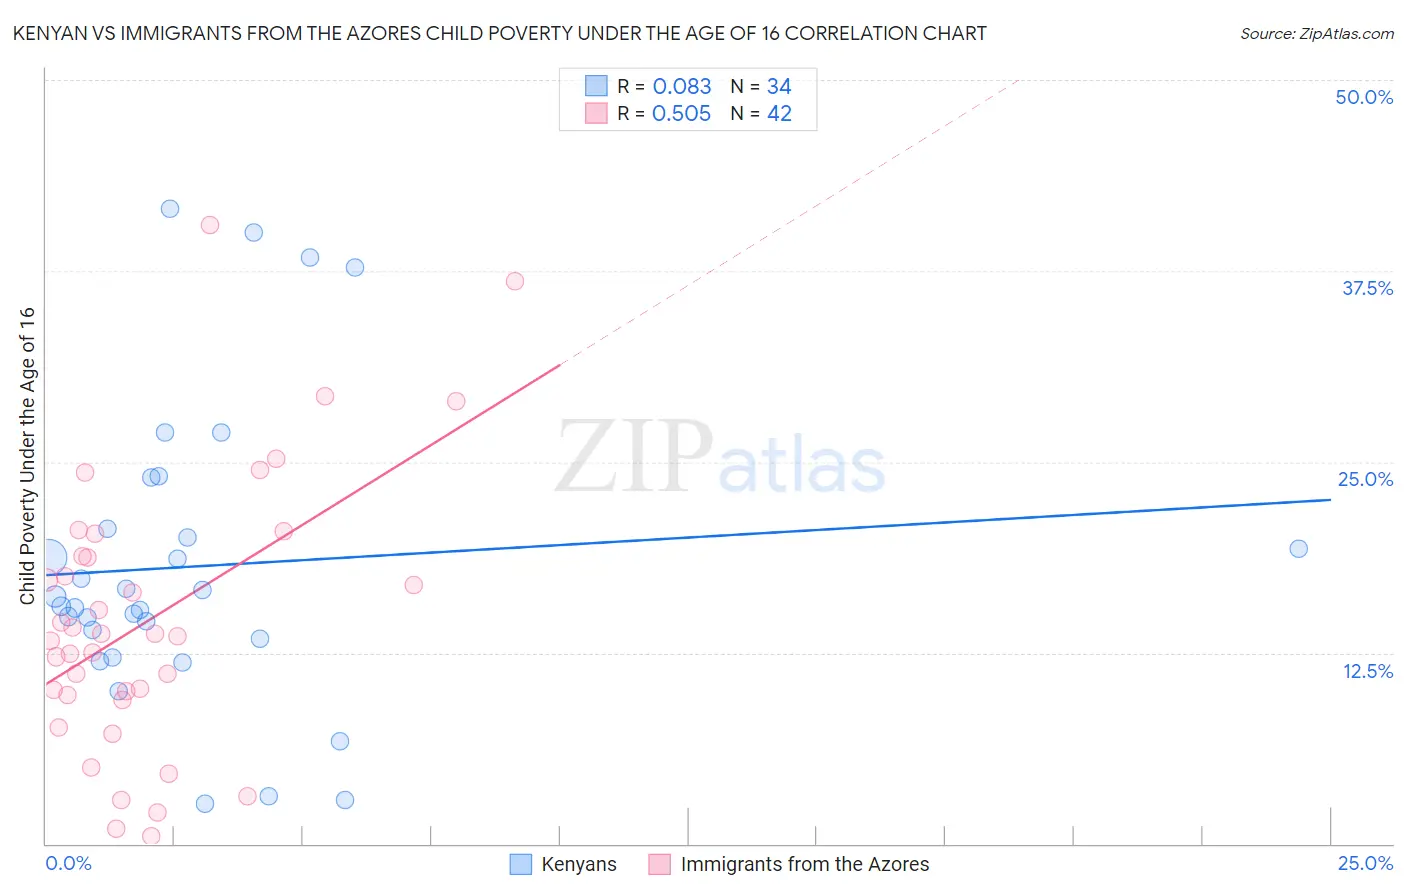 Kenyan vs Immigrants from the Azores Child Poverty Under the Age of 16